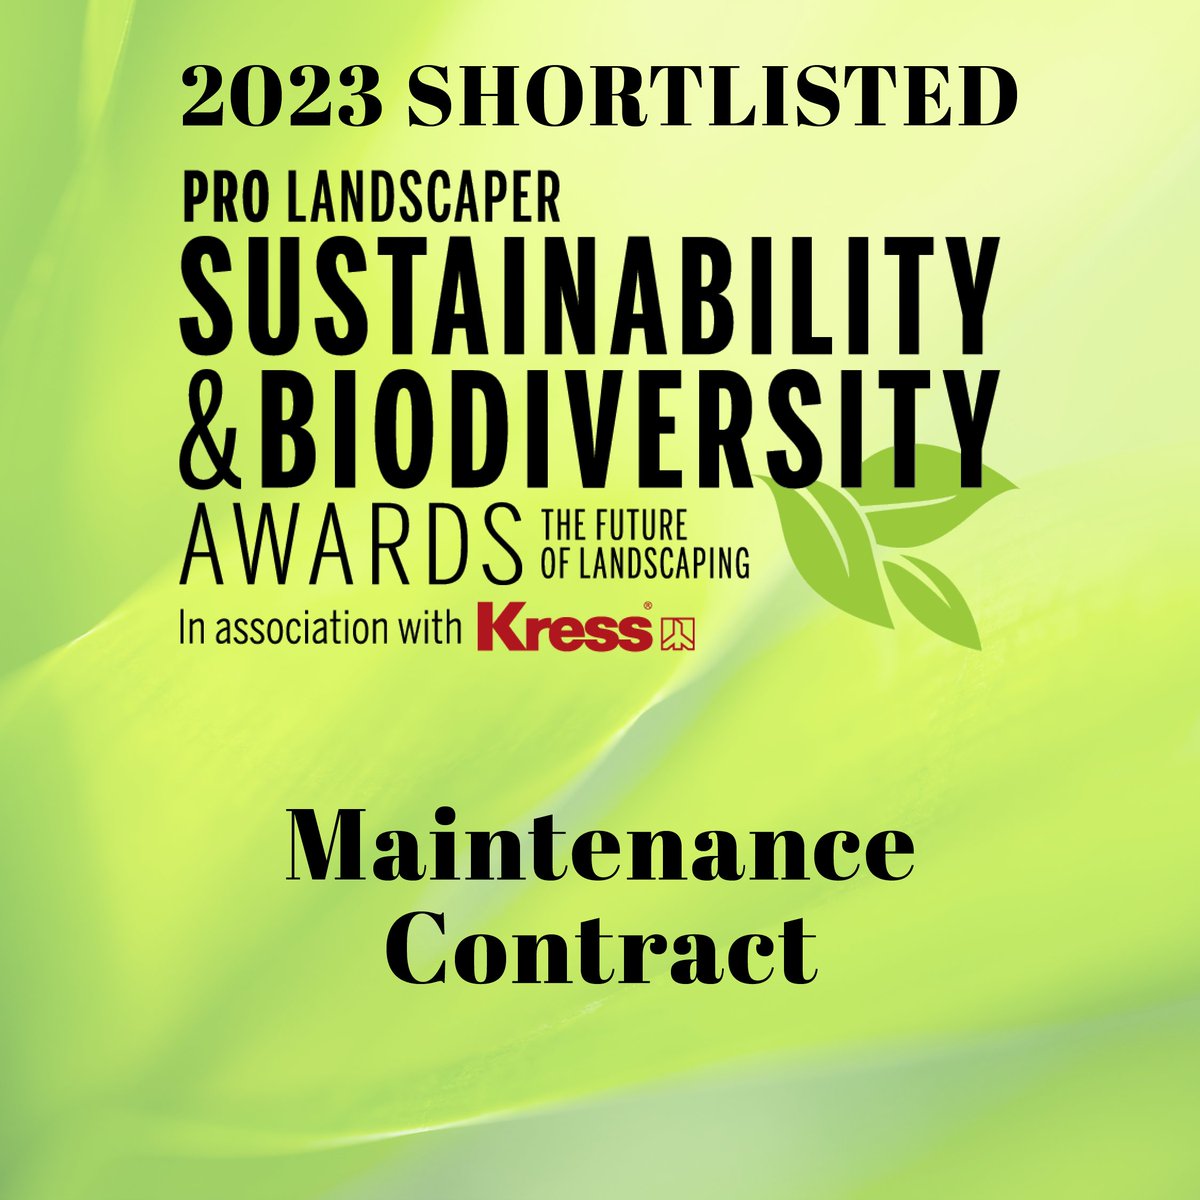 Stockley Park has been shortlisted for the Pro Landscaper Sustainability & Biodiversity Awards with The Nurture Landscapes Group 🌳 ✨#StockleyPark